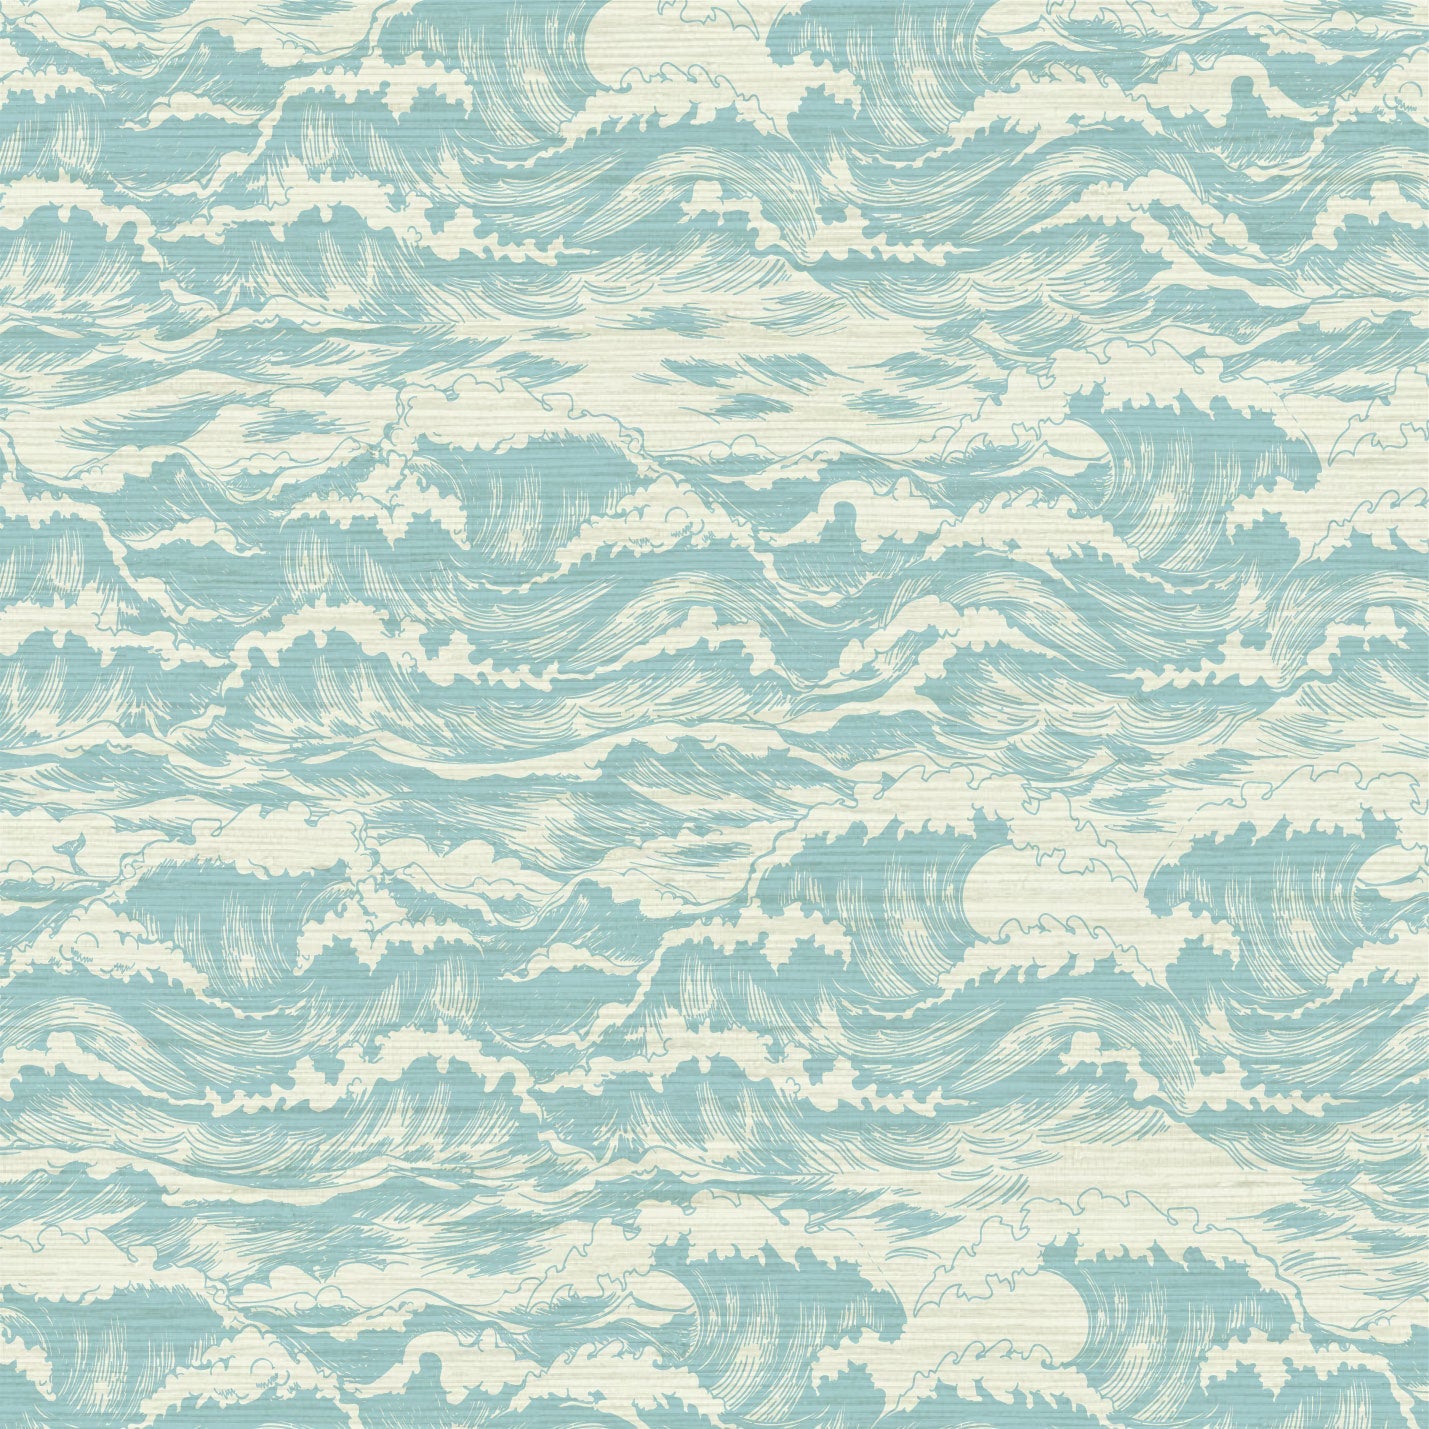 Grasscloth wallpaper Natural Textured Eco-Friendly Non-toxic High-quality  Sustainable Interior Design Bold Custom Tailor-made Retro chic Seaside Coastal Seashore Waterfront Vacation home styling Retreat Relaxed beach vibes Beach cottage Shoreline Oceanfront Nautical Cabana ocean waves water surf blue teal light blues